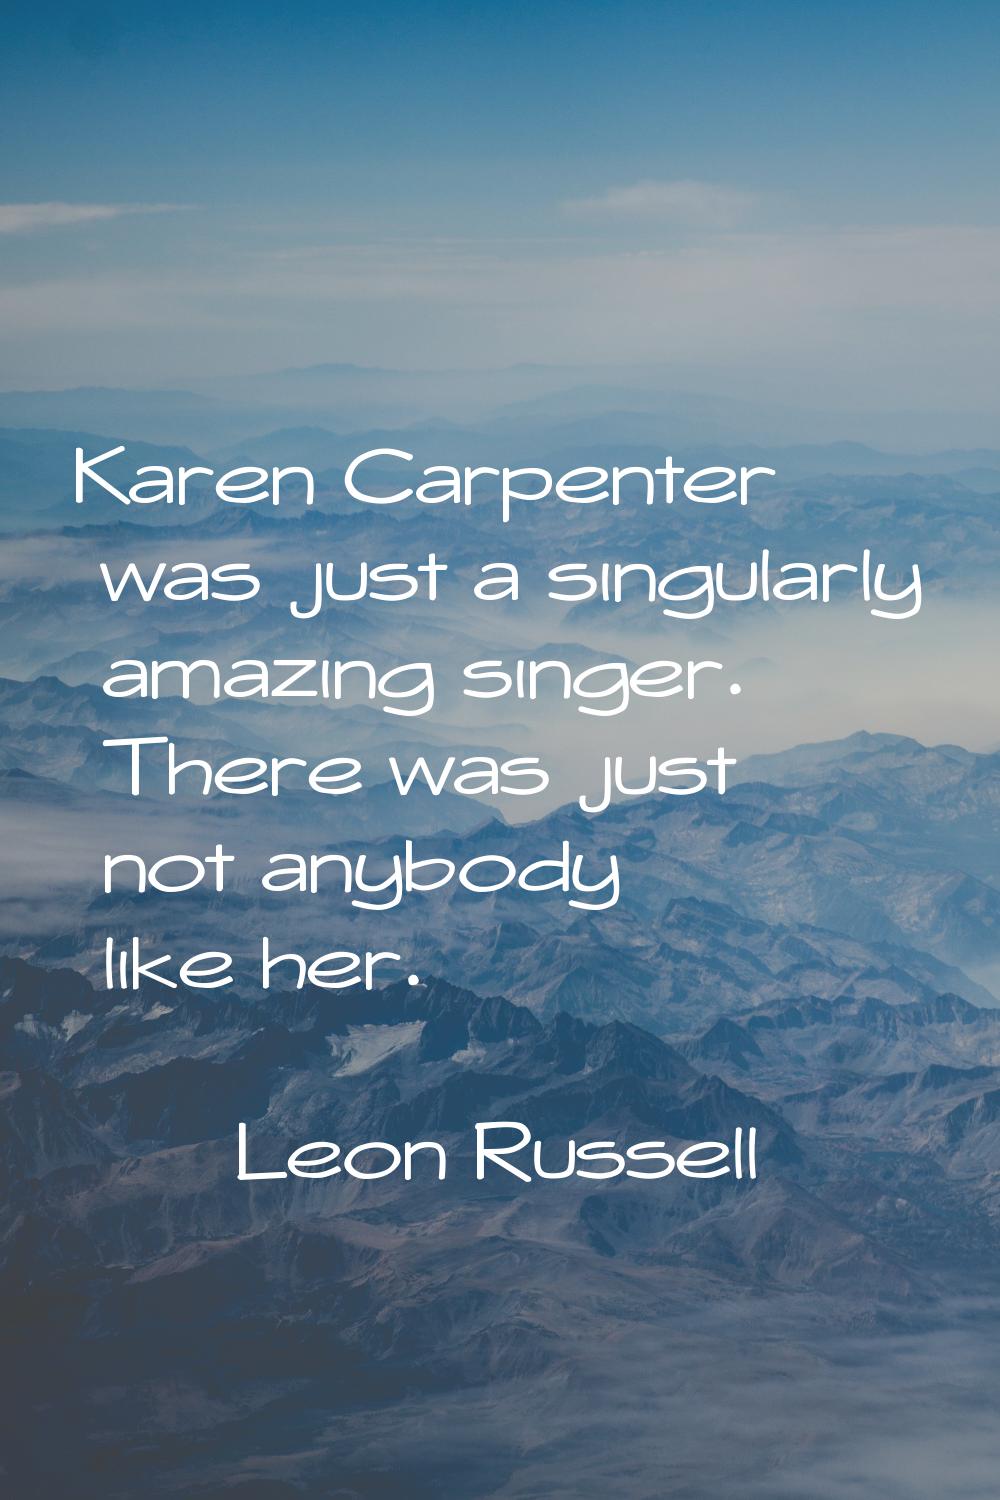 Karen Carpenter was just a singularly amazing singer. There was just not anybody like her.